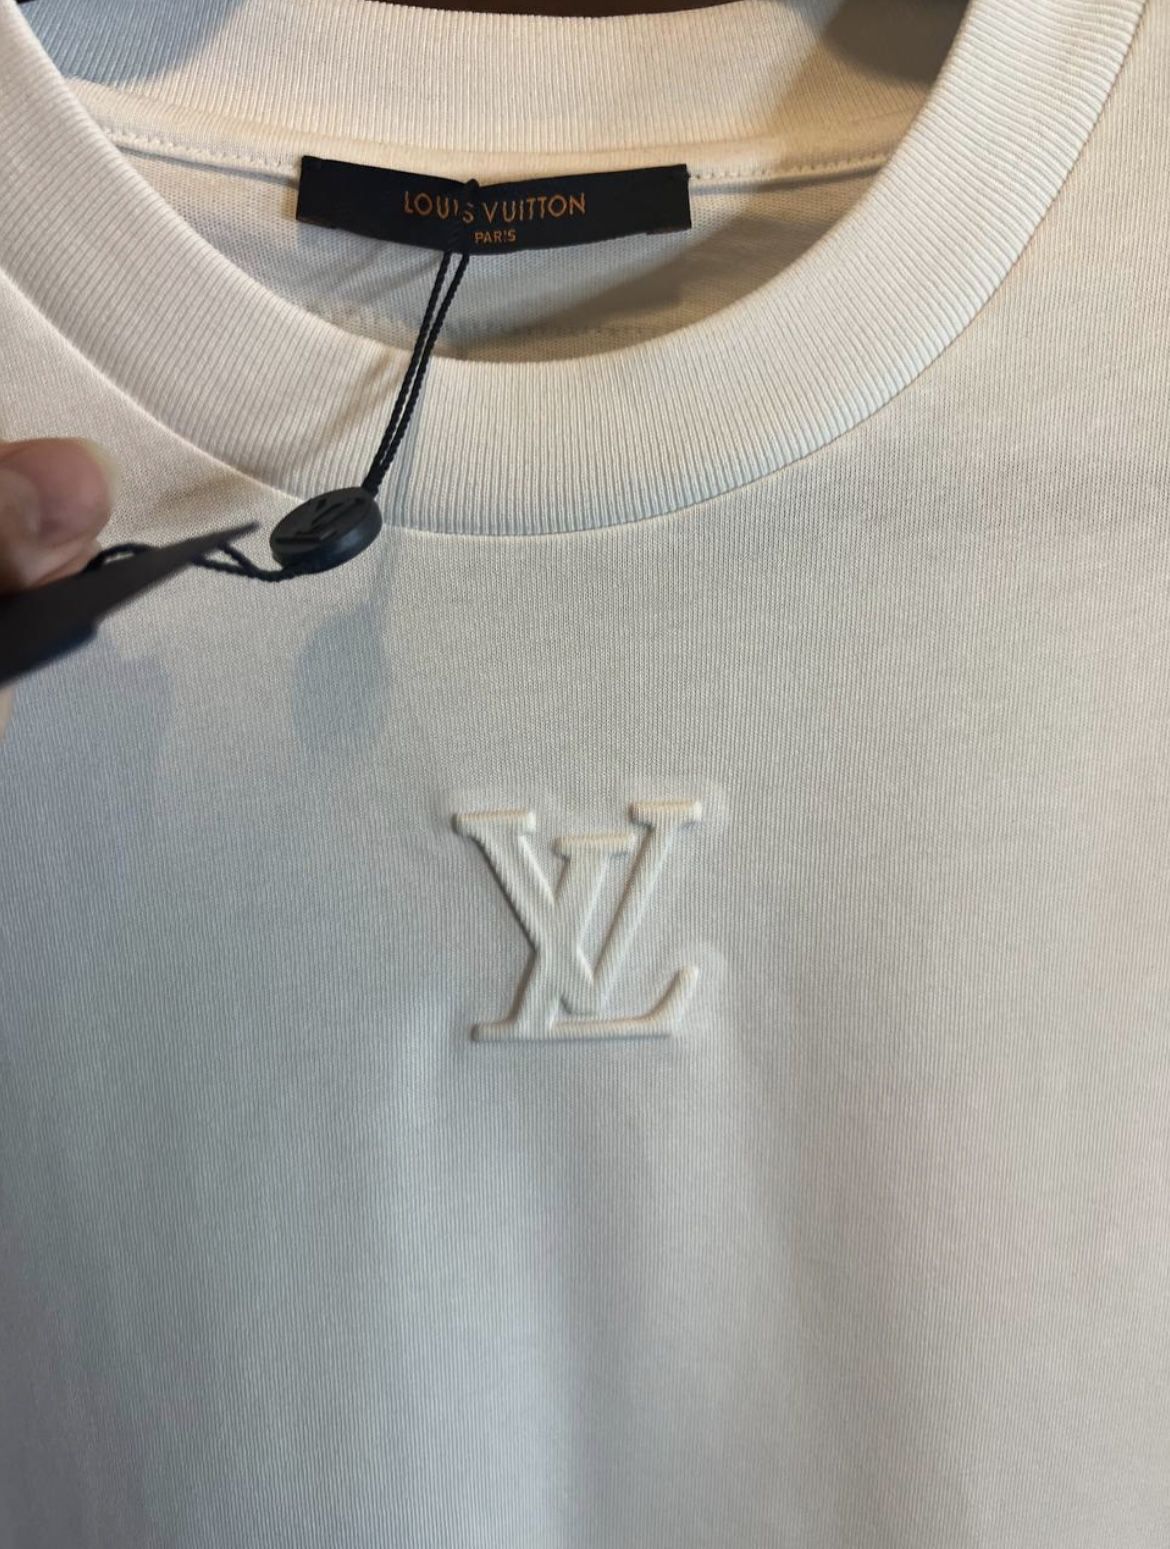 tshirt Louis Vuitton t shirt Same Day t-shirt for Sale in Wesley Chapel